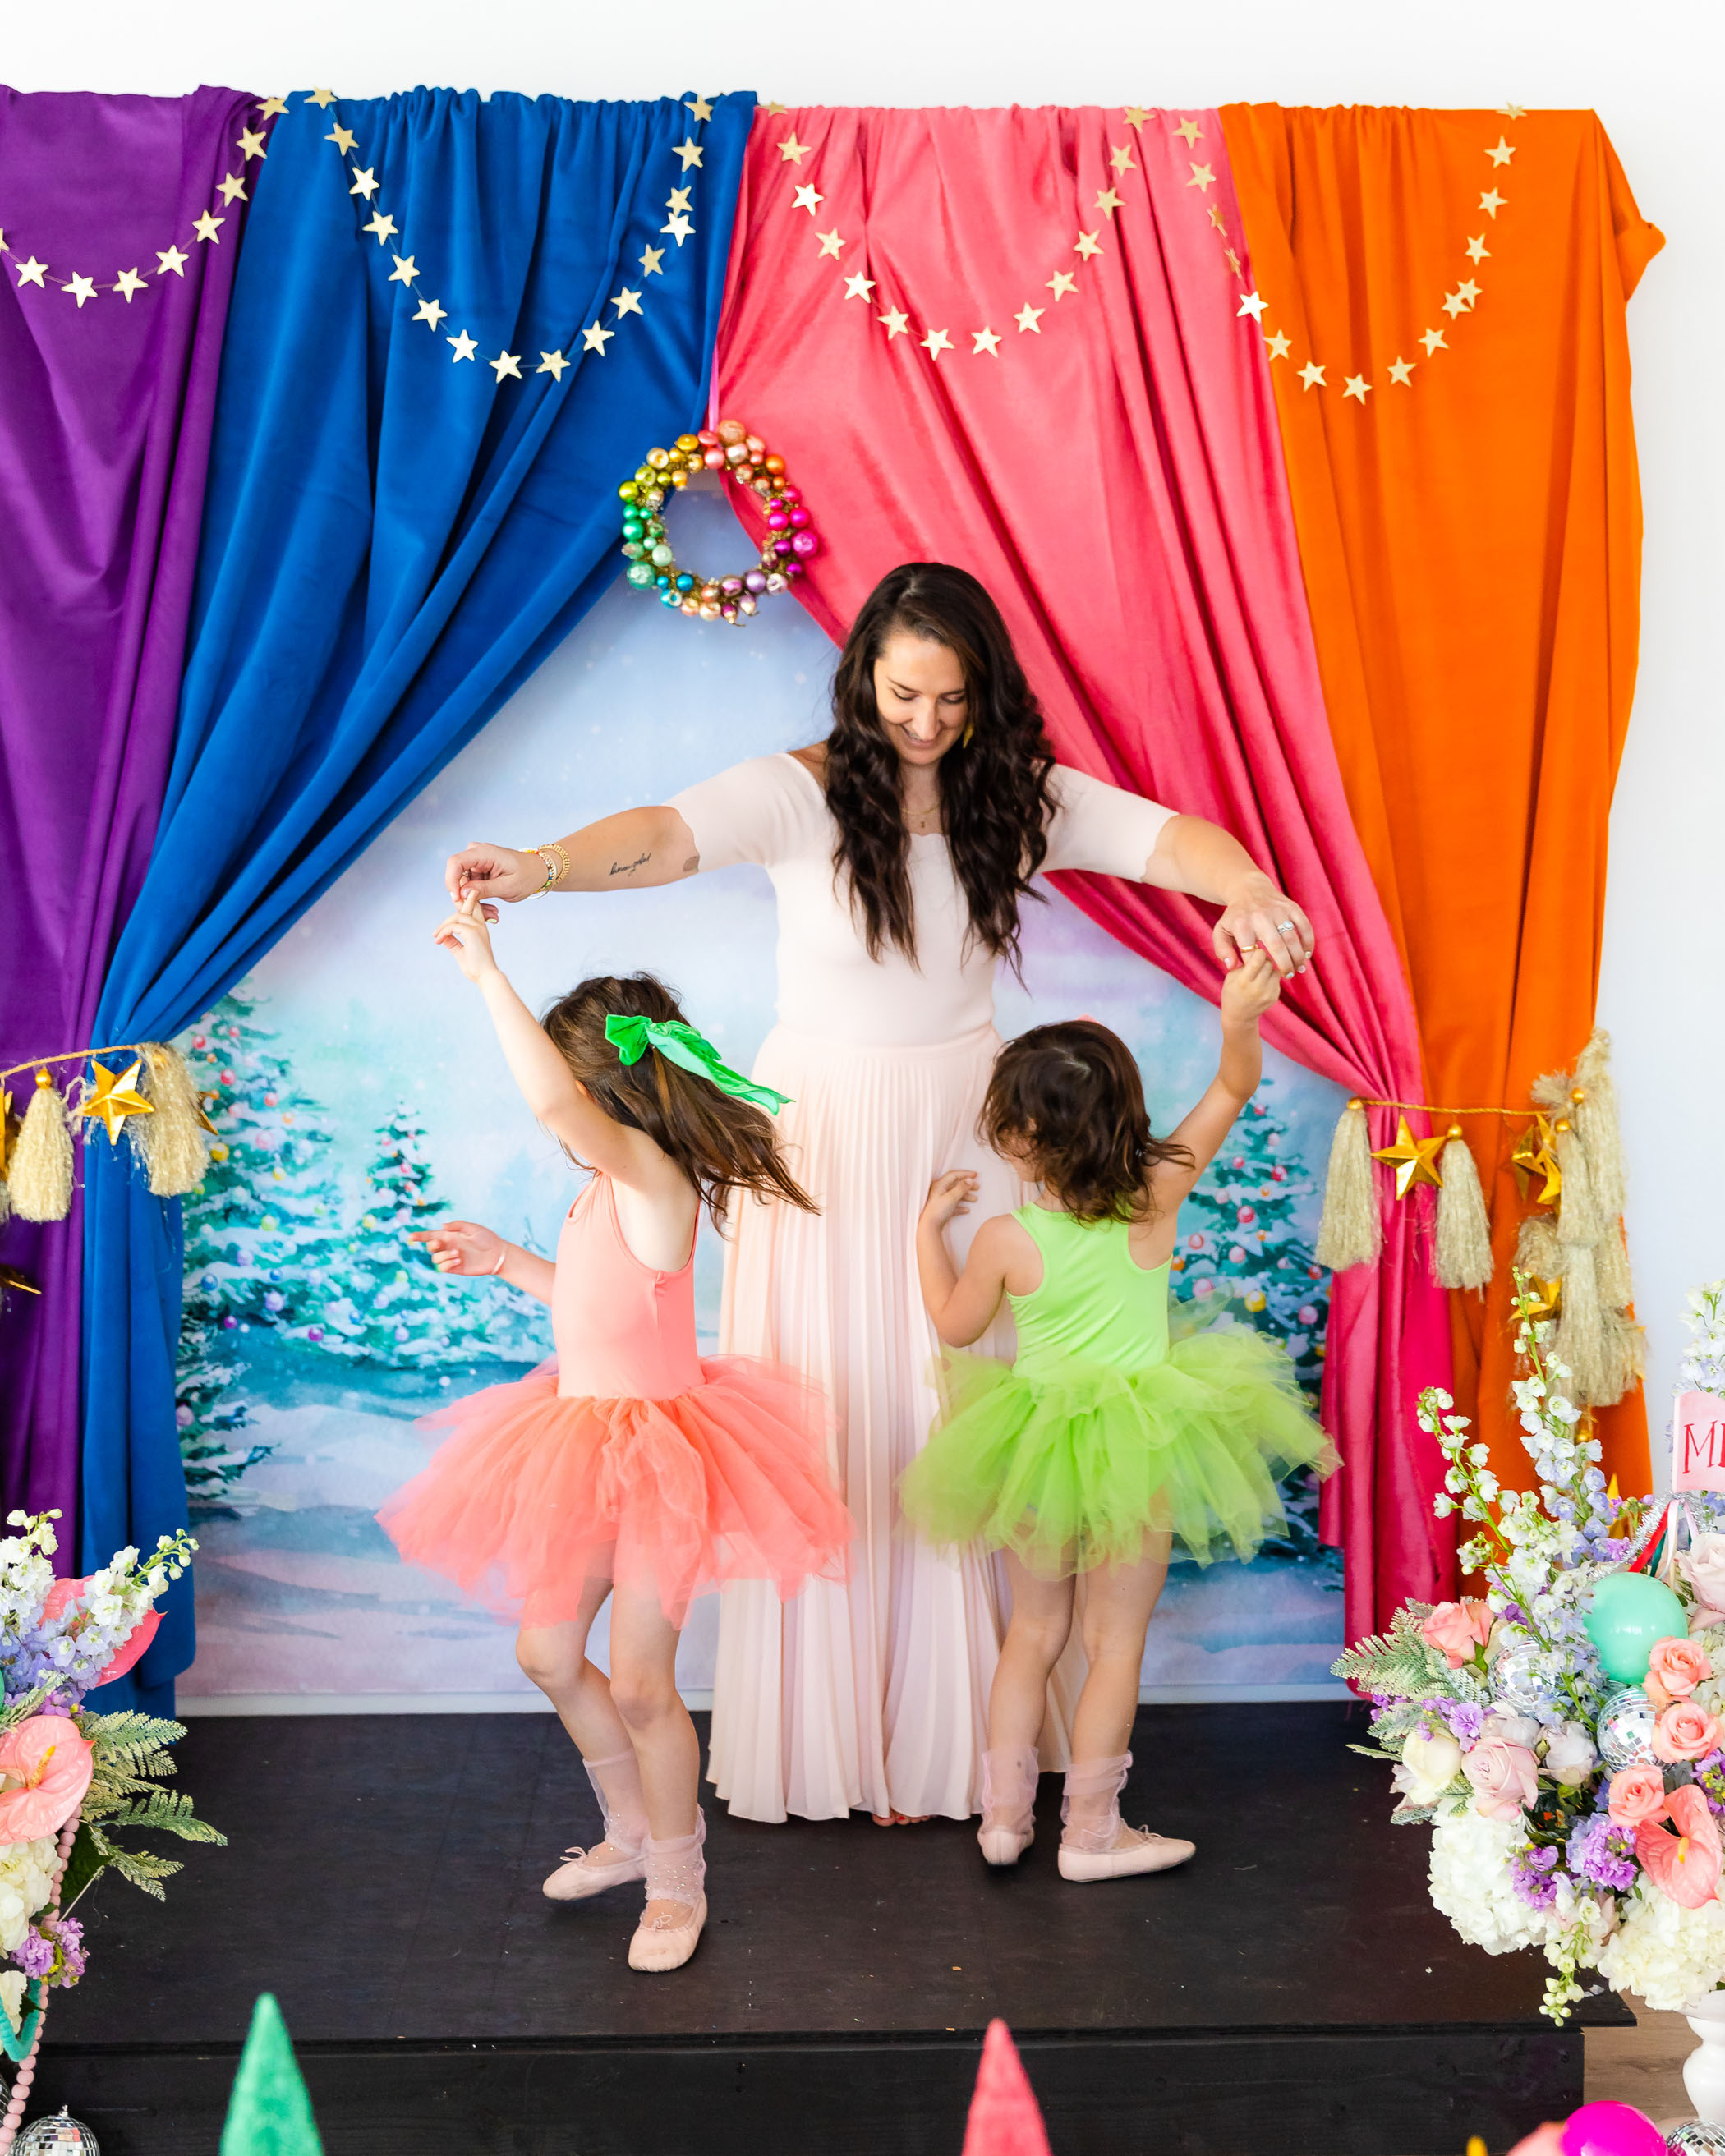 Little girls in colorful tutus twirling